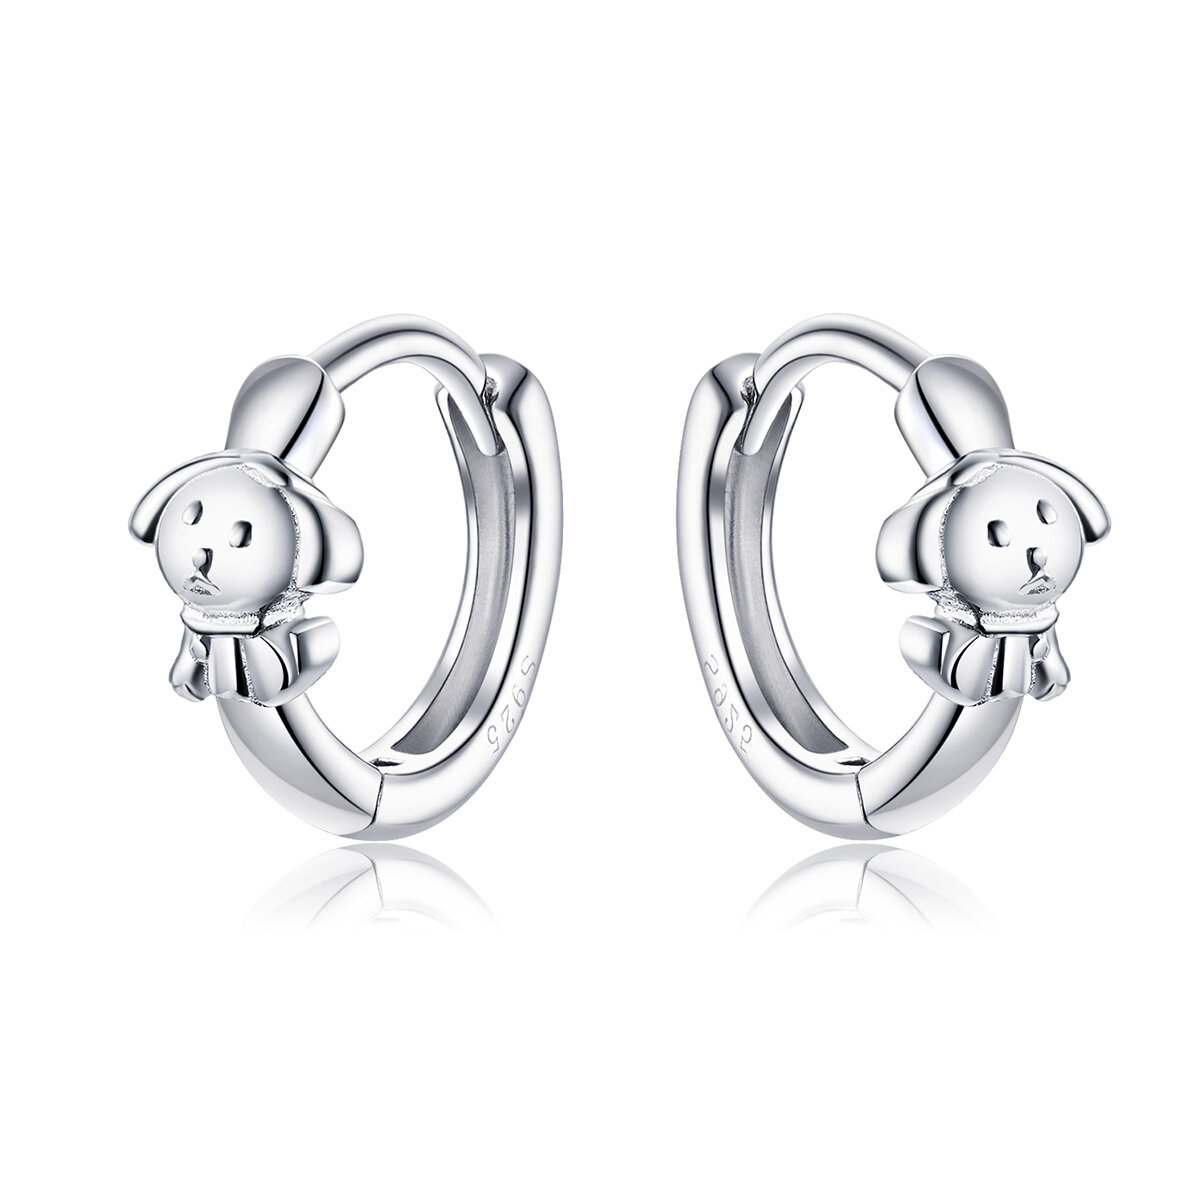 GemKing SCE662 the Honest puppy dog S925 Sterling Silver Earring